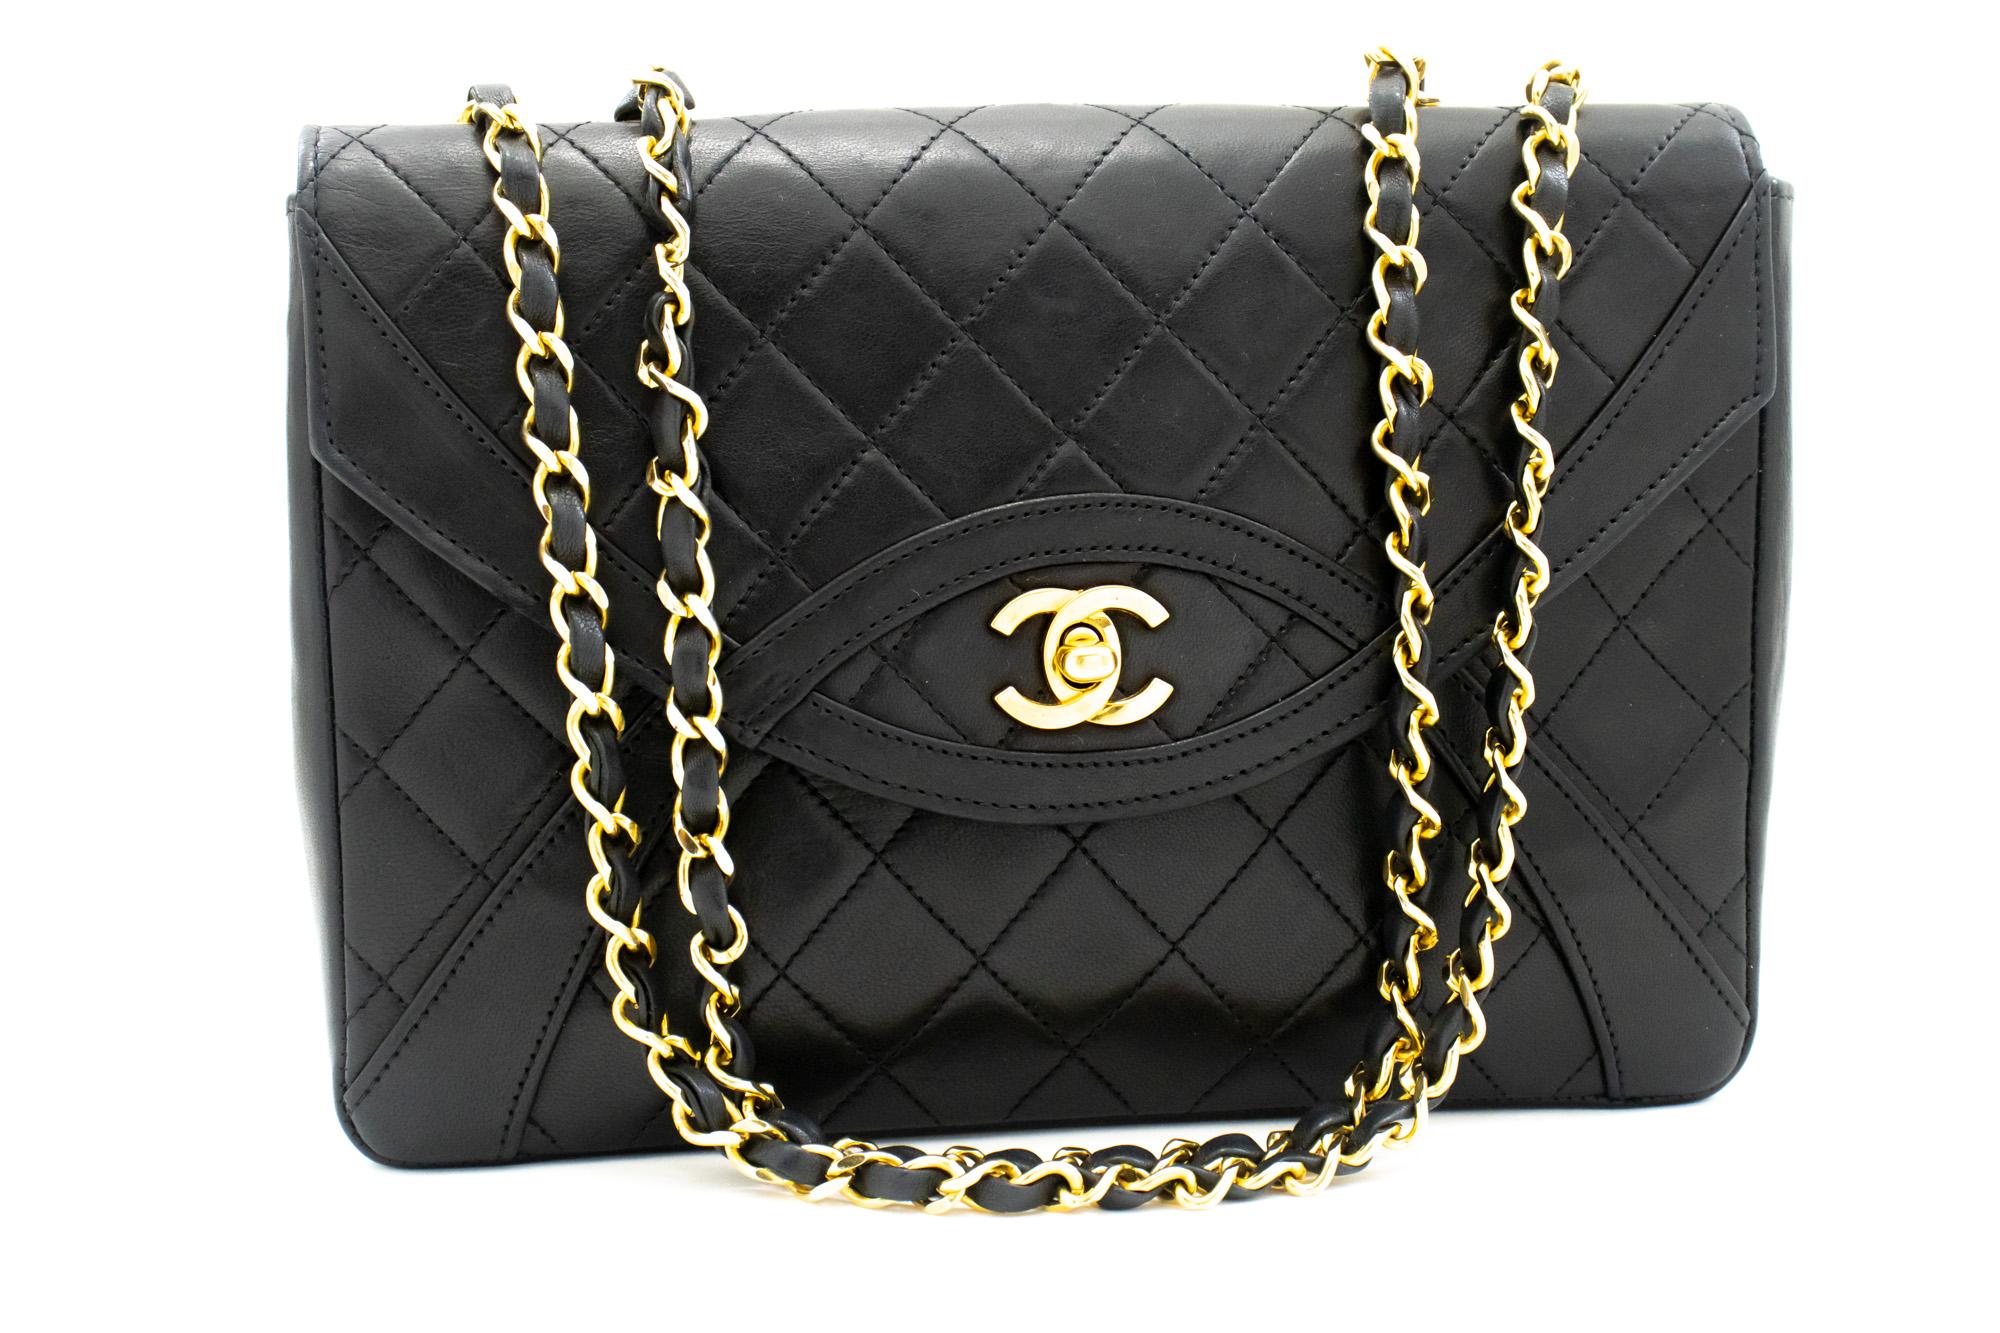 An authentic CHANEL Vintage Classic Chain Shoulder Bag Single Flap Quilted Lamb. The color is Black. The outside material is Leather. The pattern is Solid. This item is Vintage / Classic. The year of manufacture would be 1986-1988.
Conditions &